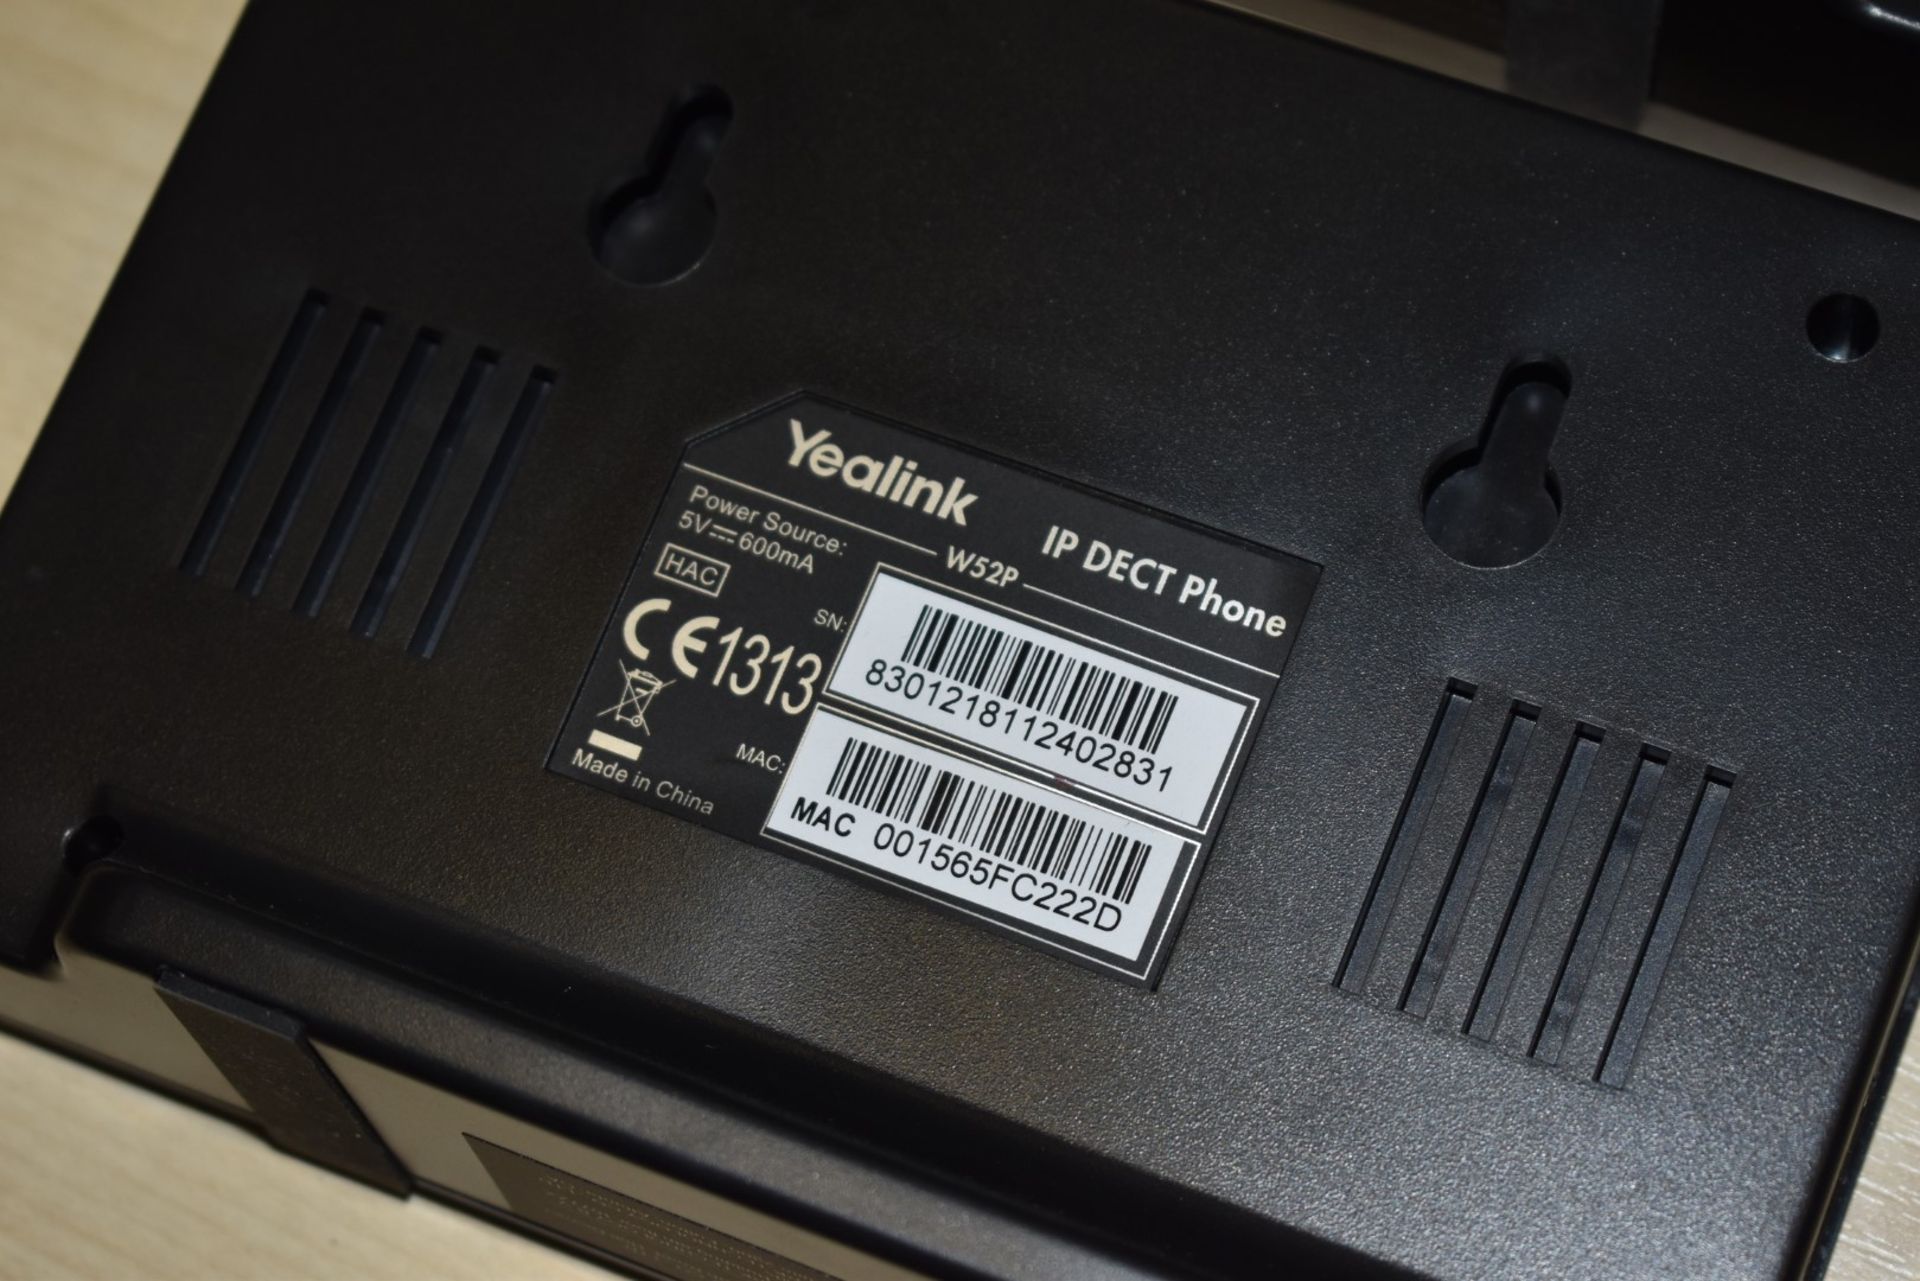 3 x Yealink IP Dect Phone Model W52P - Includes One PSU Only - Ref: In2124 wh1 pal1 - CL011 - - Image 5 of 7